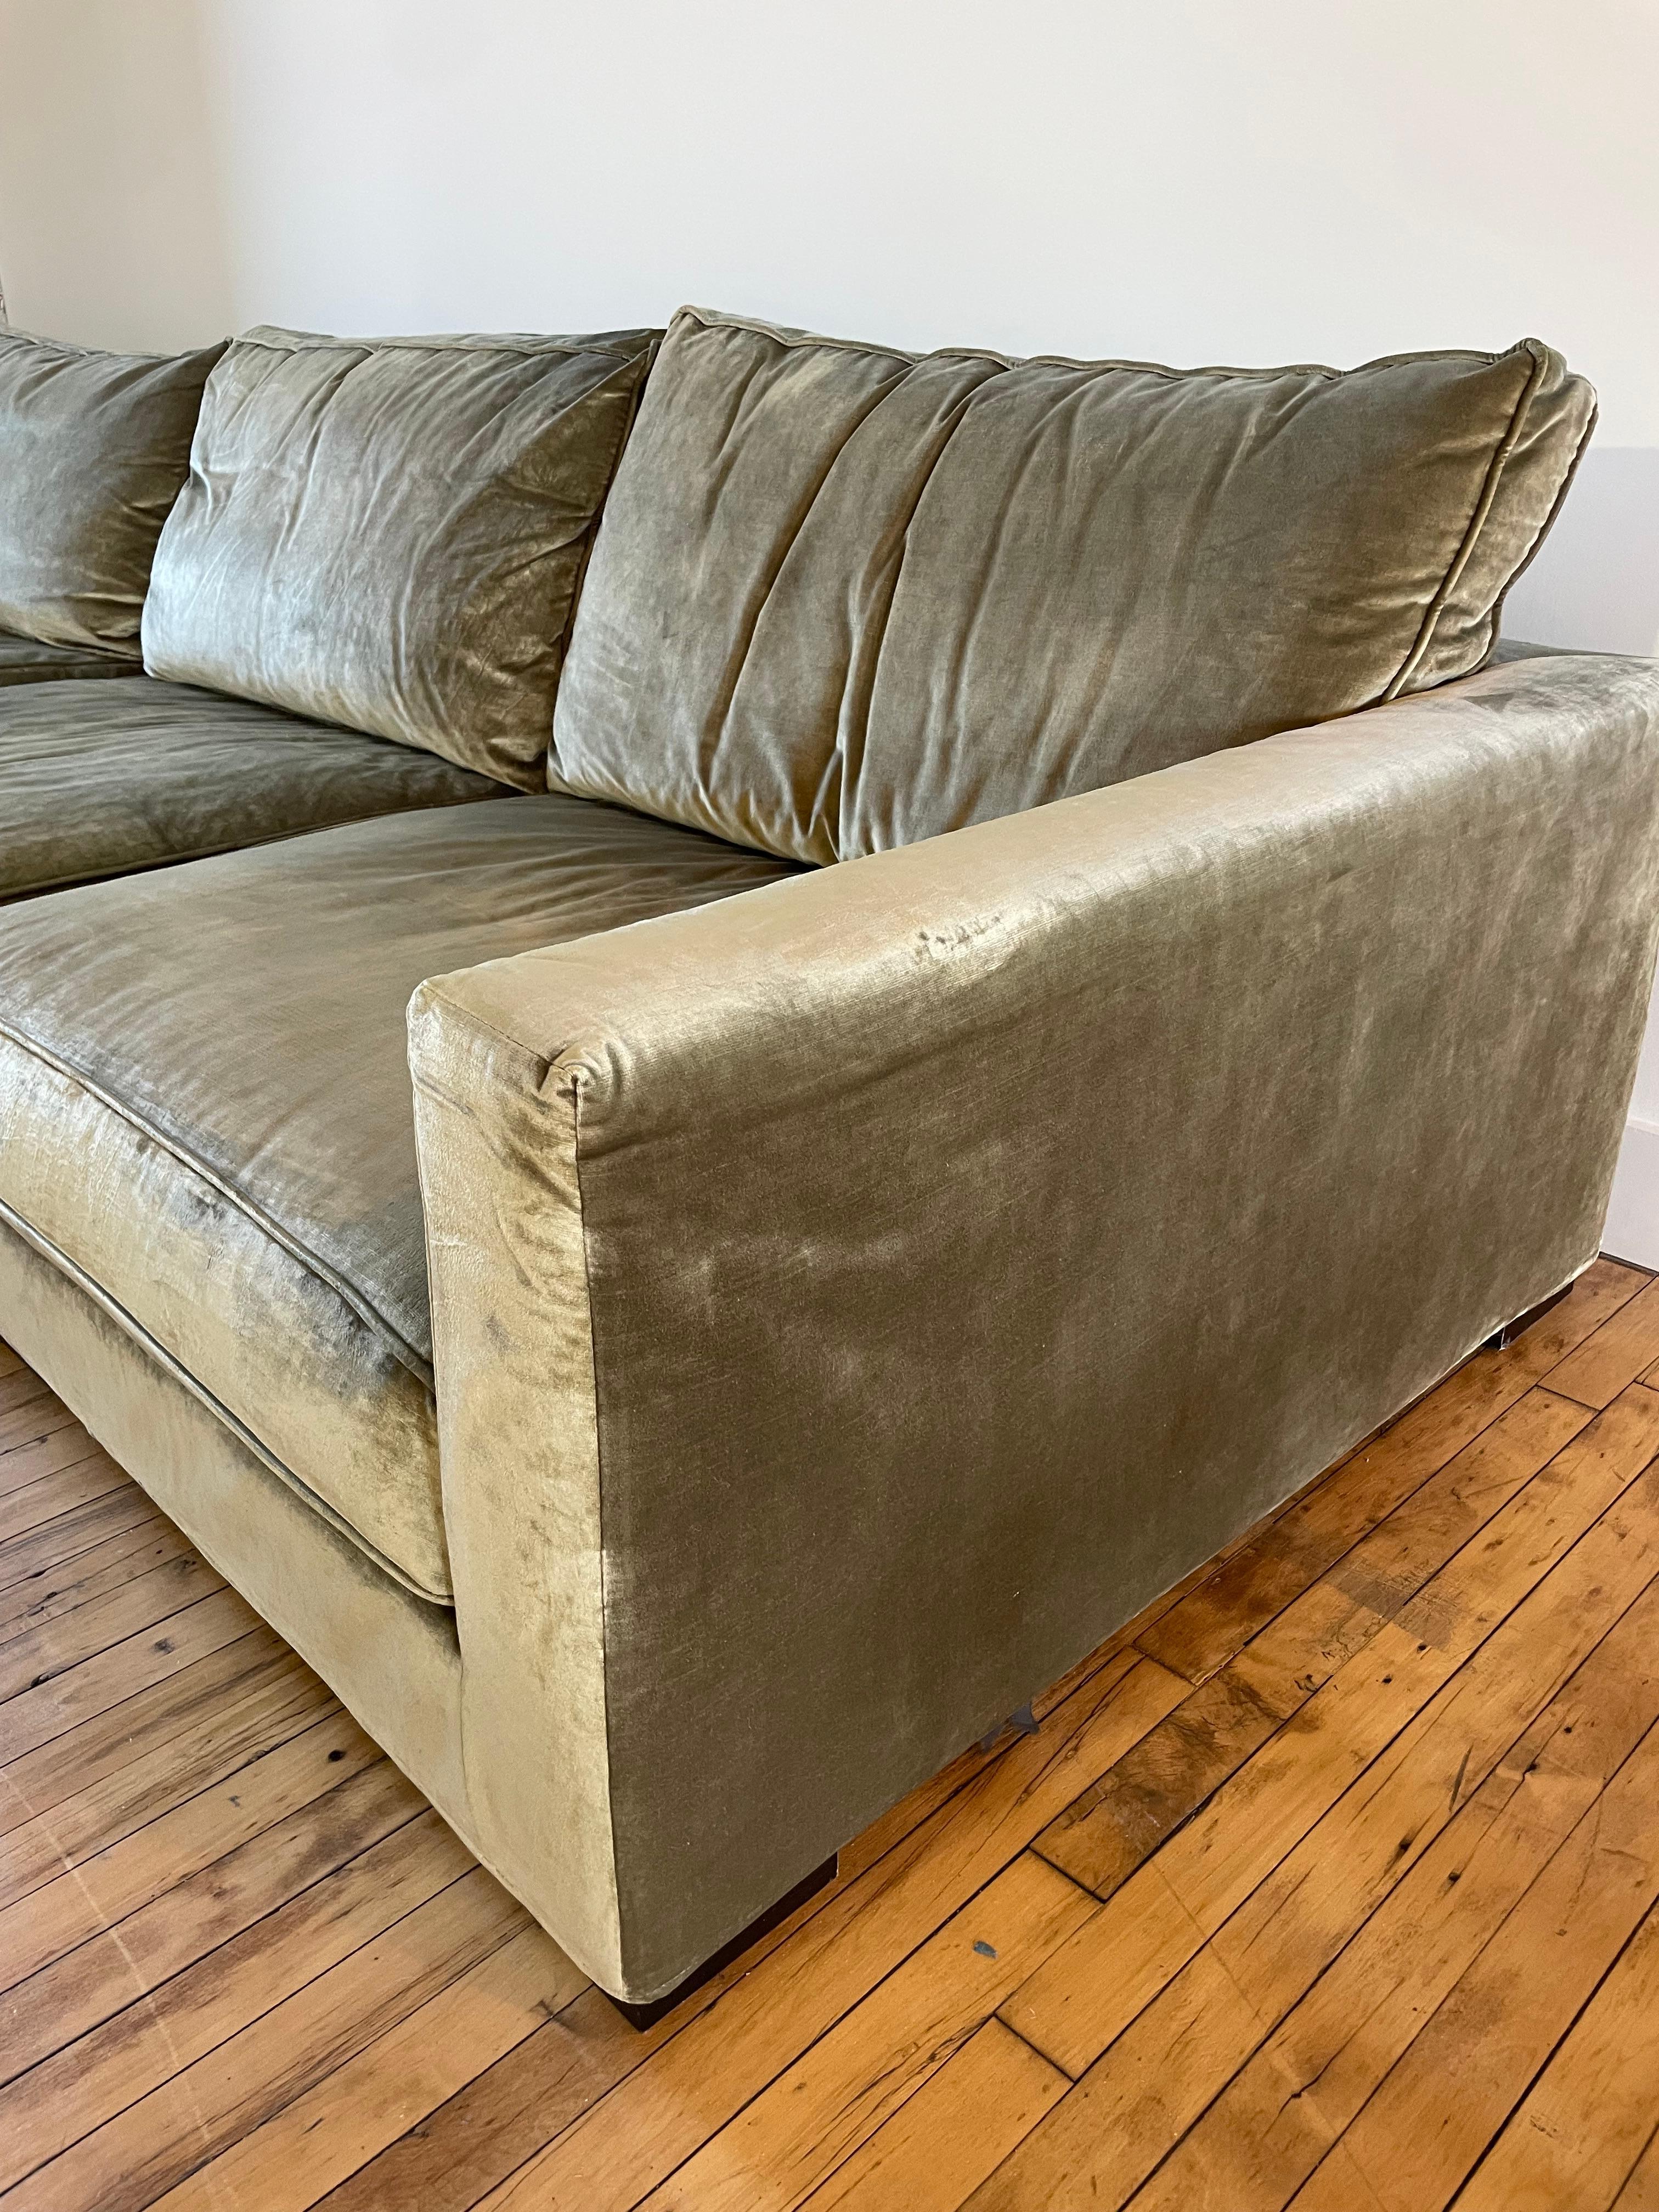 Stunning olive green couch from Roche Bobois in a luxurious chenille or velvet fabric.

This “Long Island” model currently retails for over $30,000. 

The fabric reflects light creating a luminous and rich appearance.

The couch is large and deep.